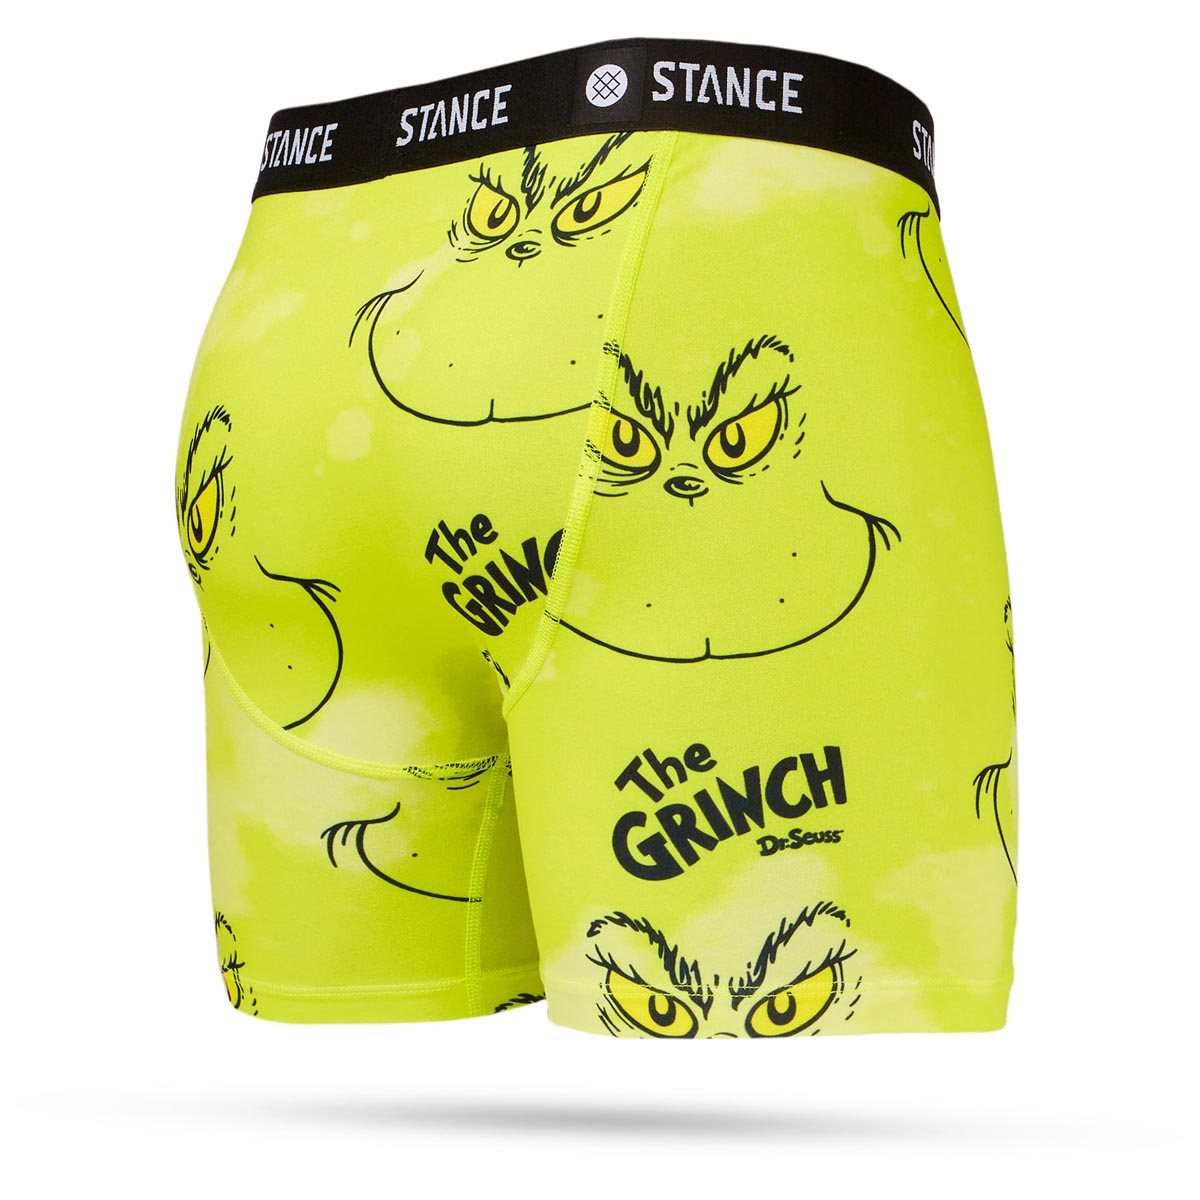 Stance Stole Boxer Brief - Green image 2